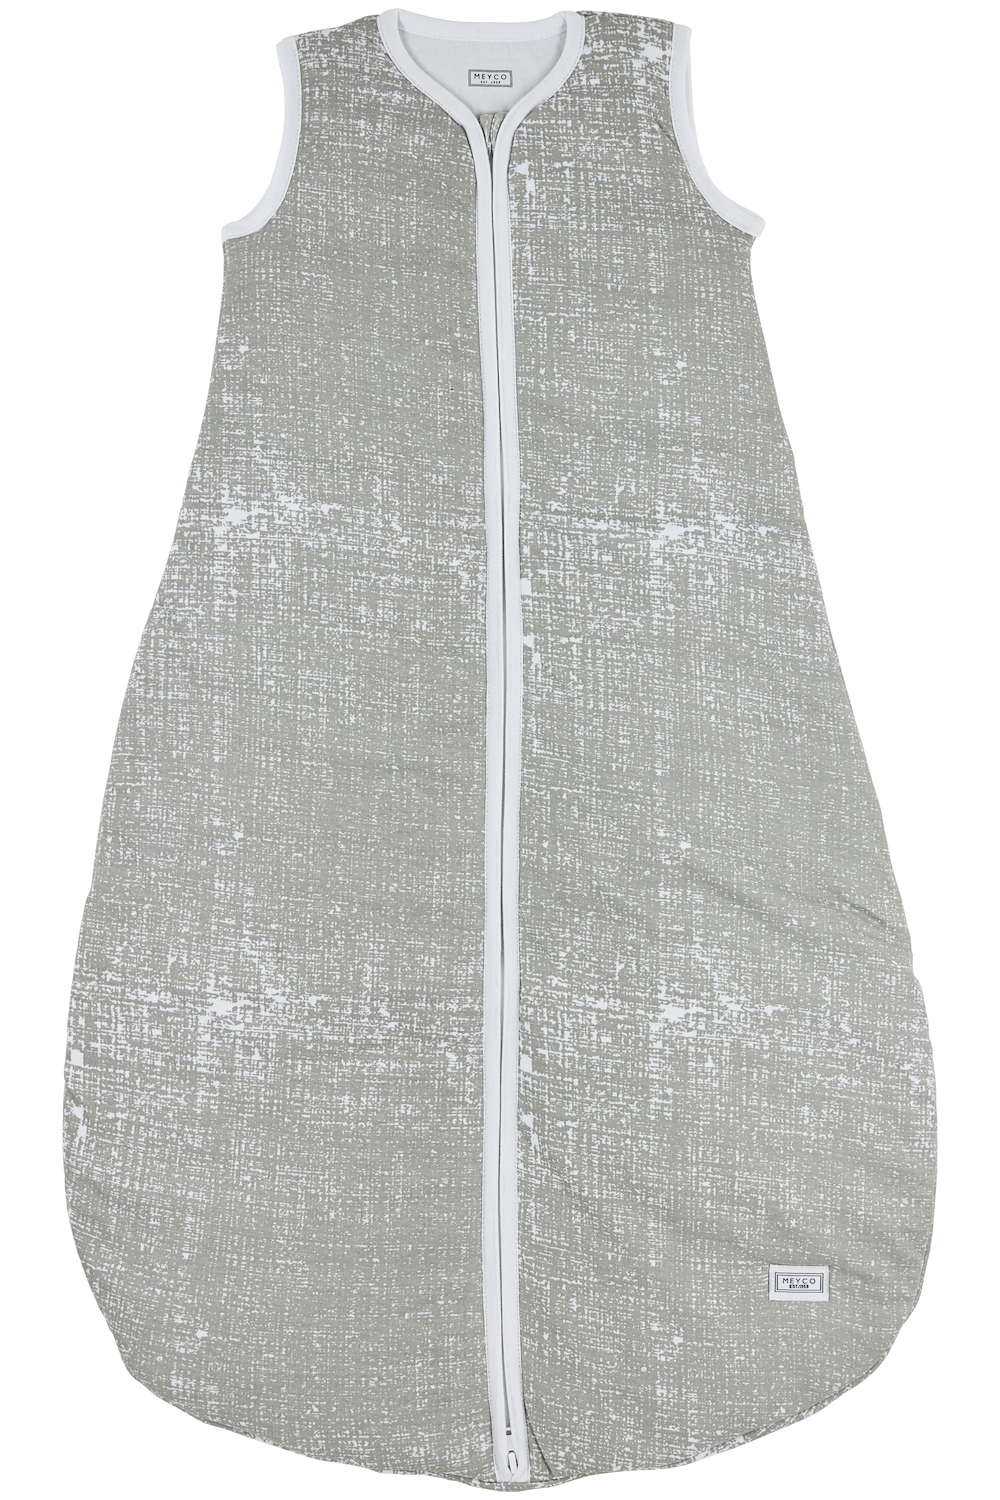 Baby Sleeping Bag Round Lined Fine Lines - Grey - 62